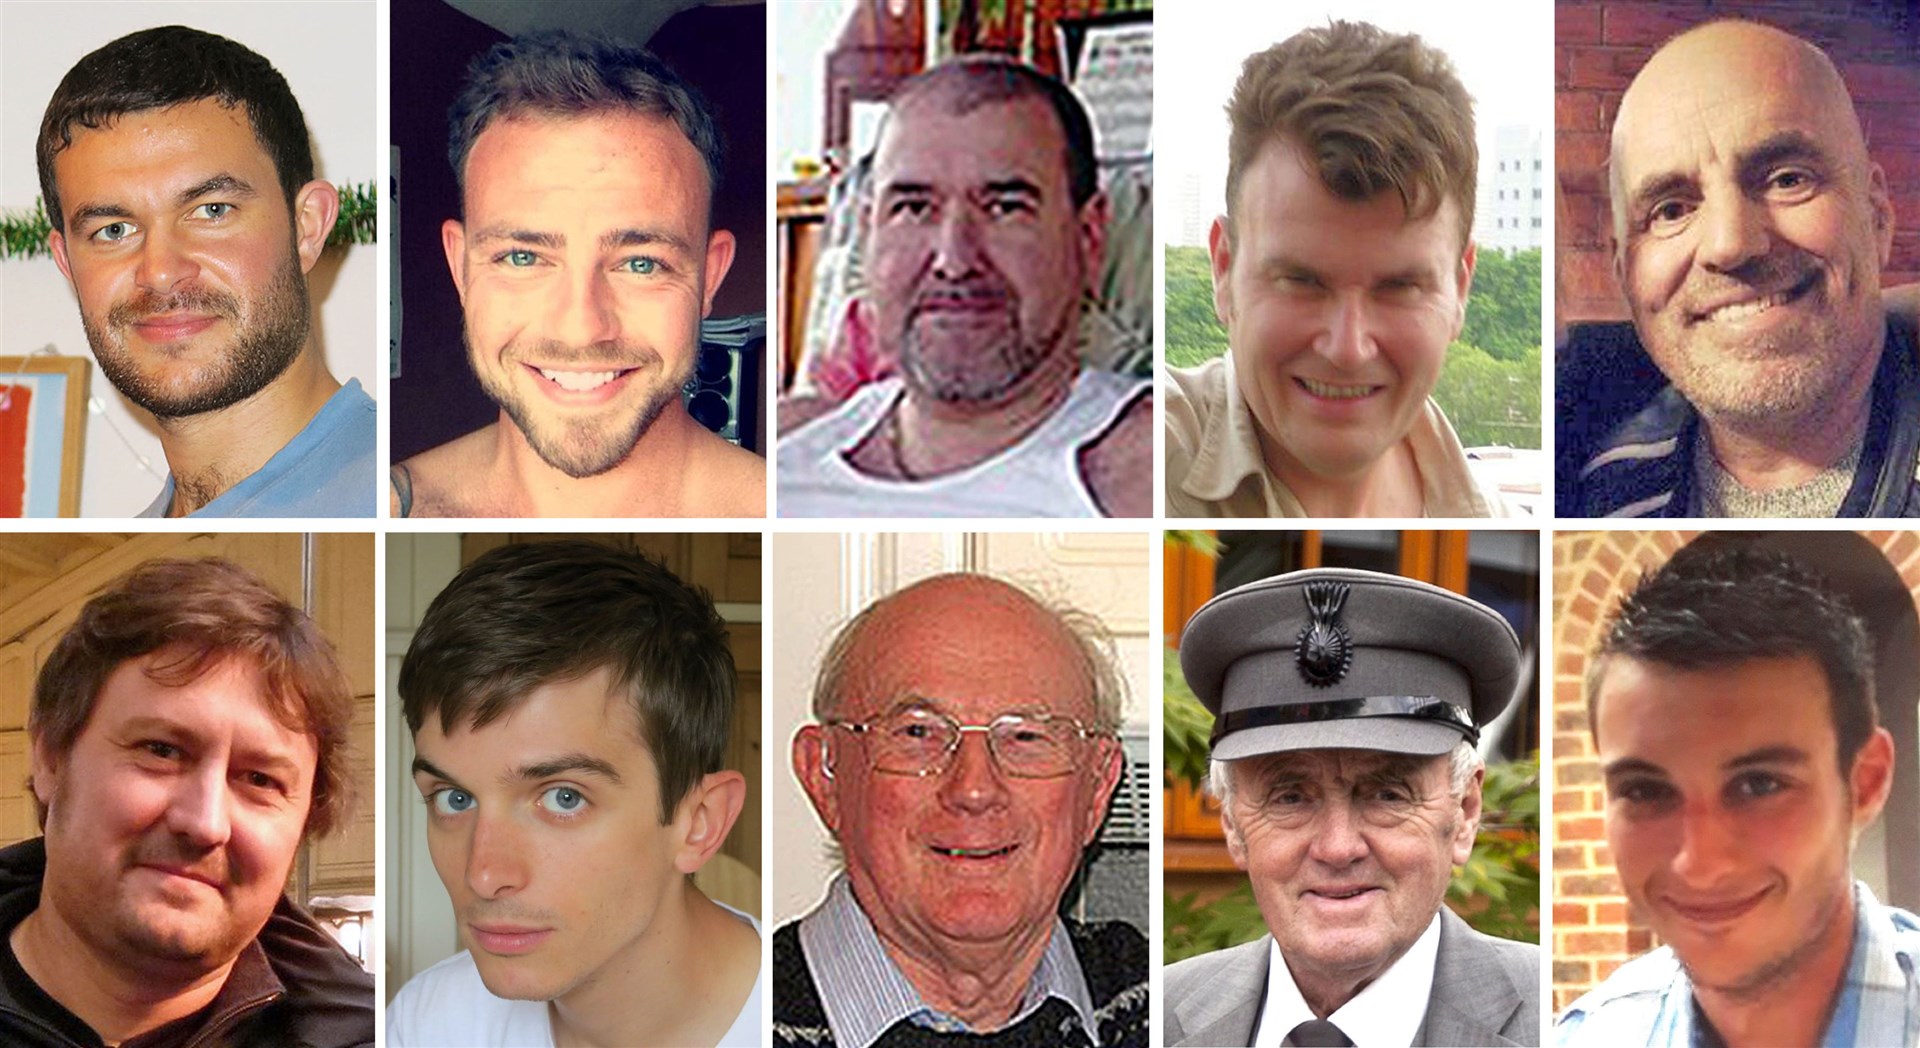 The victims included, from left, top row, Matthew Grimstone, Matt Jones, Mark Reeves, Tony Brightwell and Mark Trussler. (Bottom row from left) Dylan Archer, Richard Smith, Graham Mallinson, Maurice Abrahams and Daniele Polito (Sussex Police/CPS/PA)